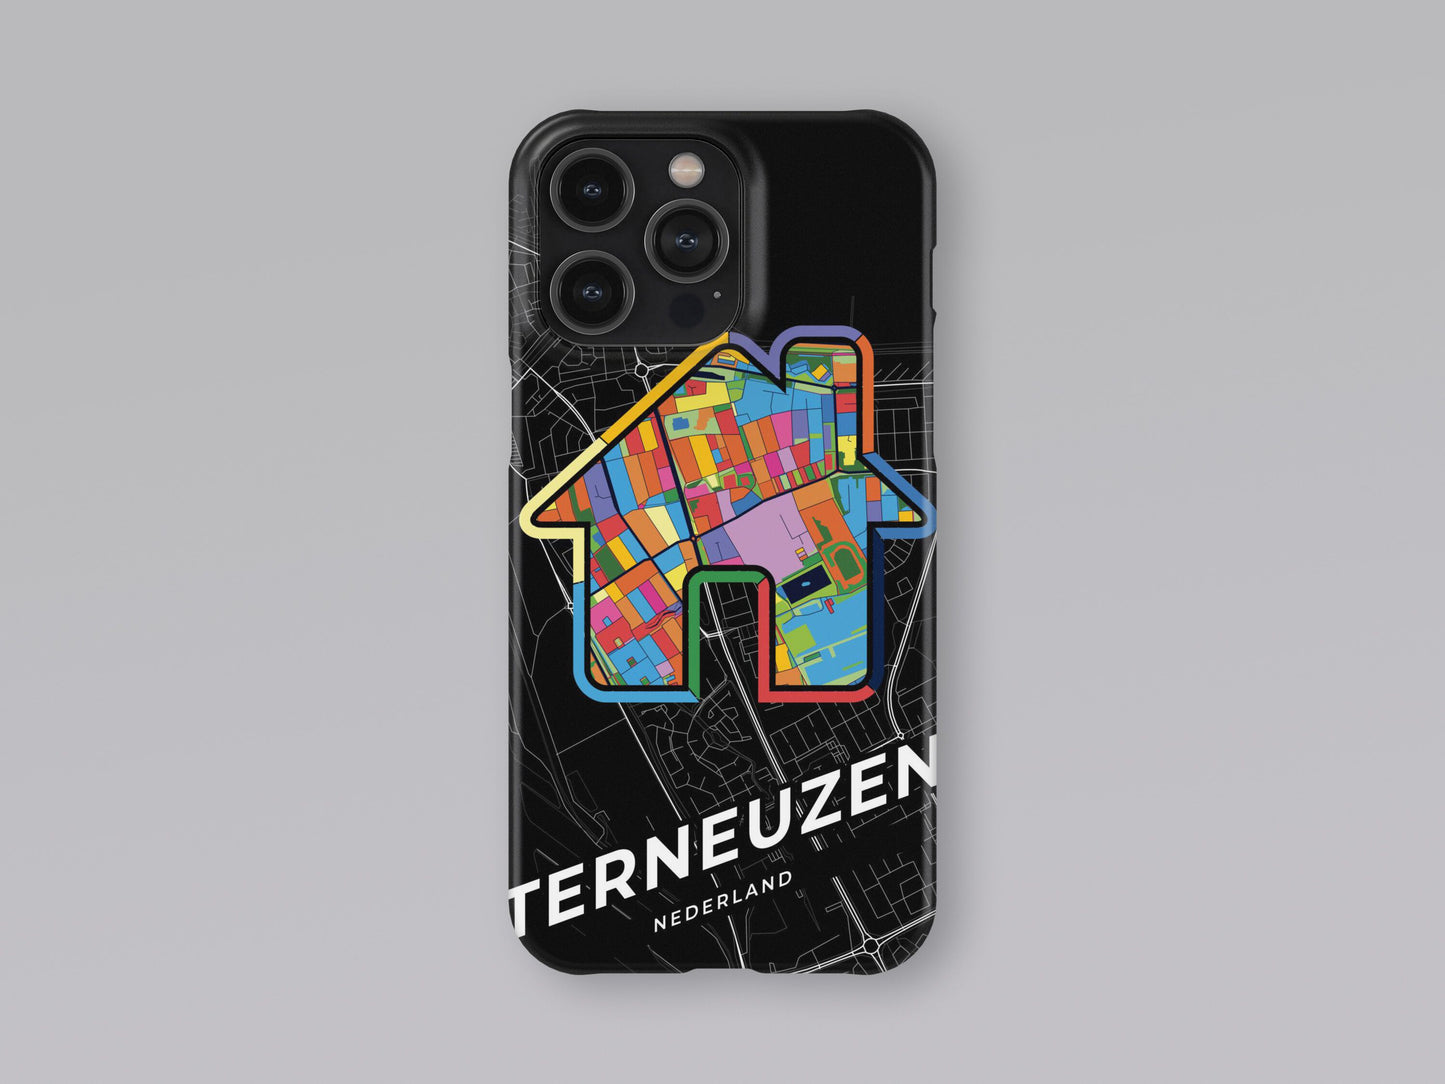 Terneuzen Netherlands slim phone case with colorful icon 3